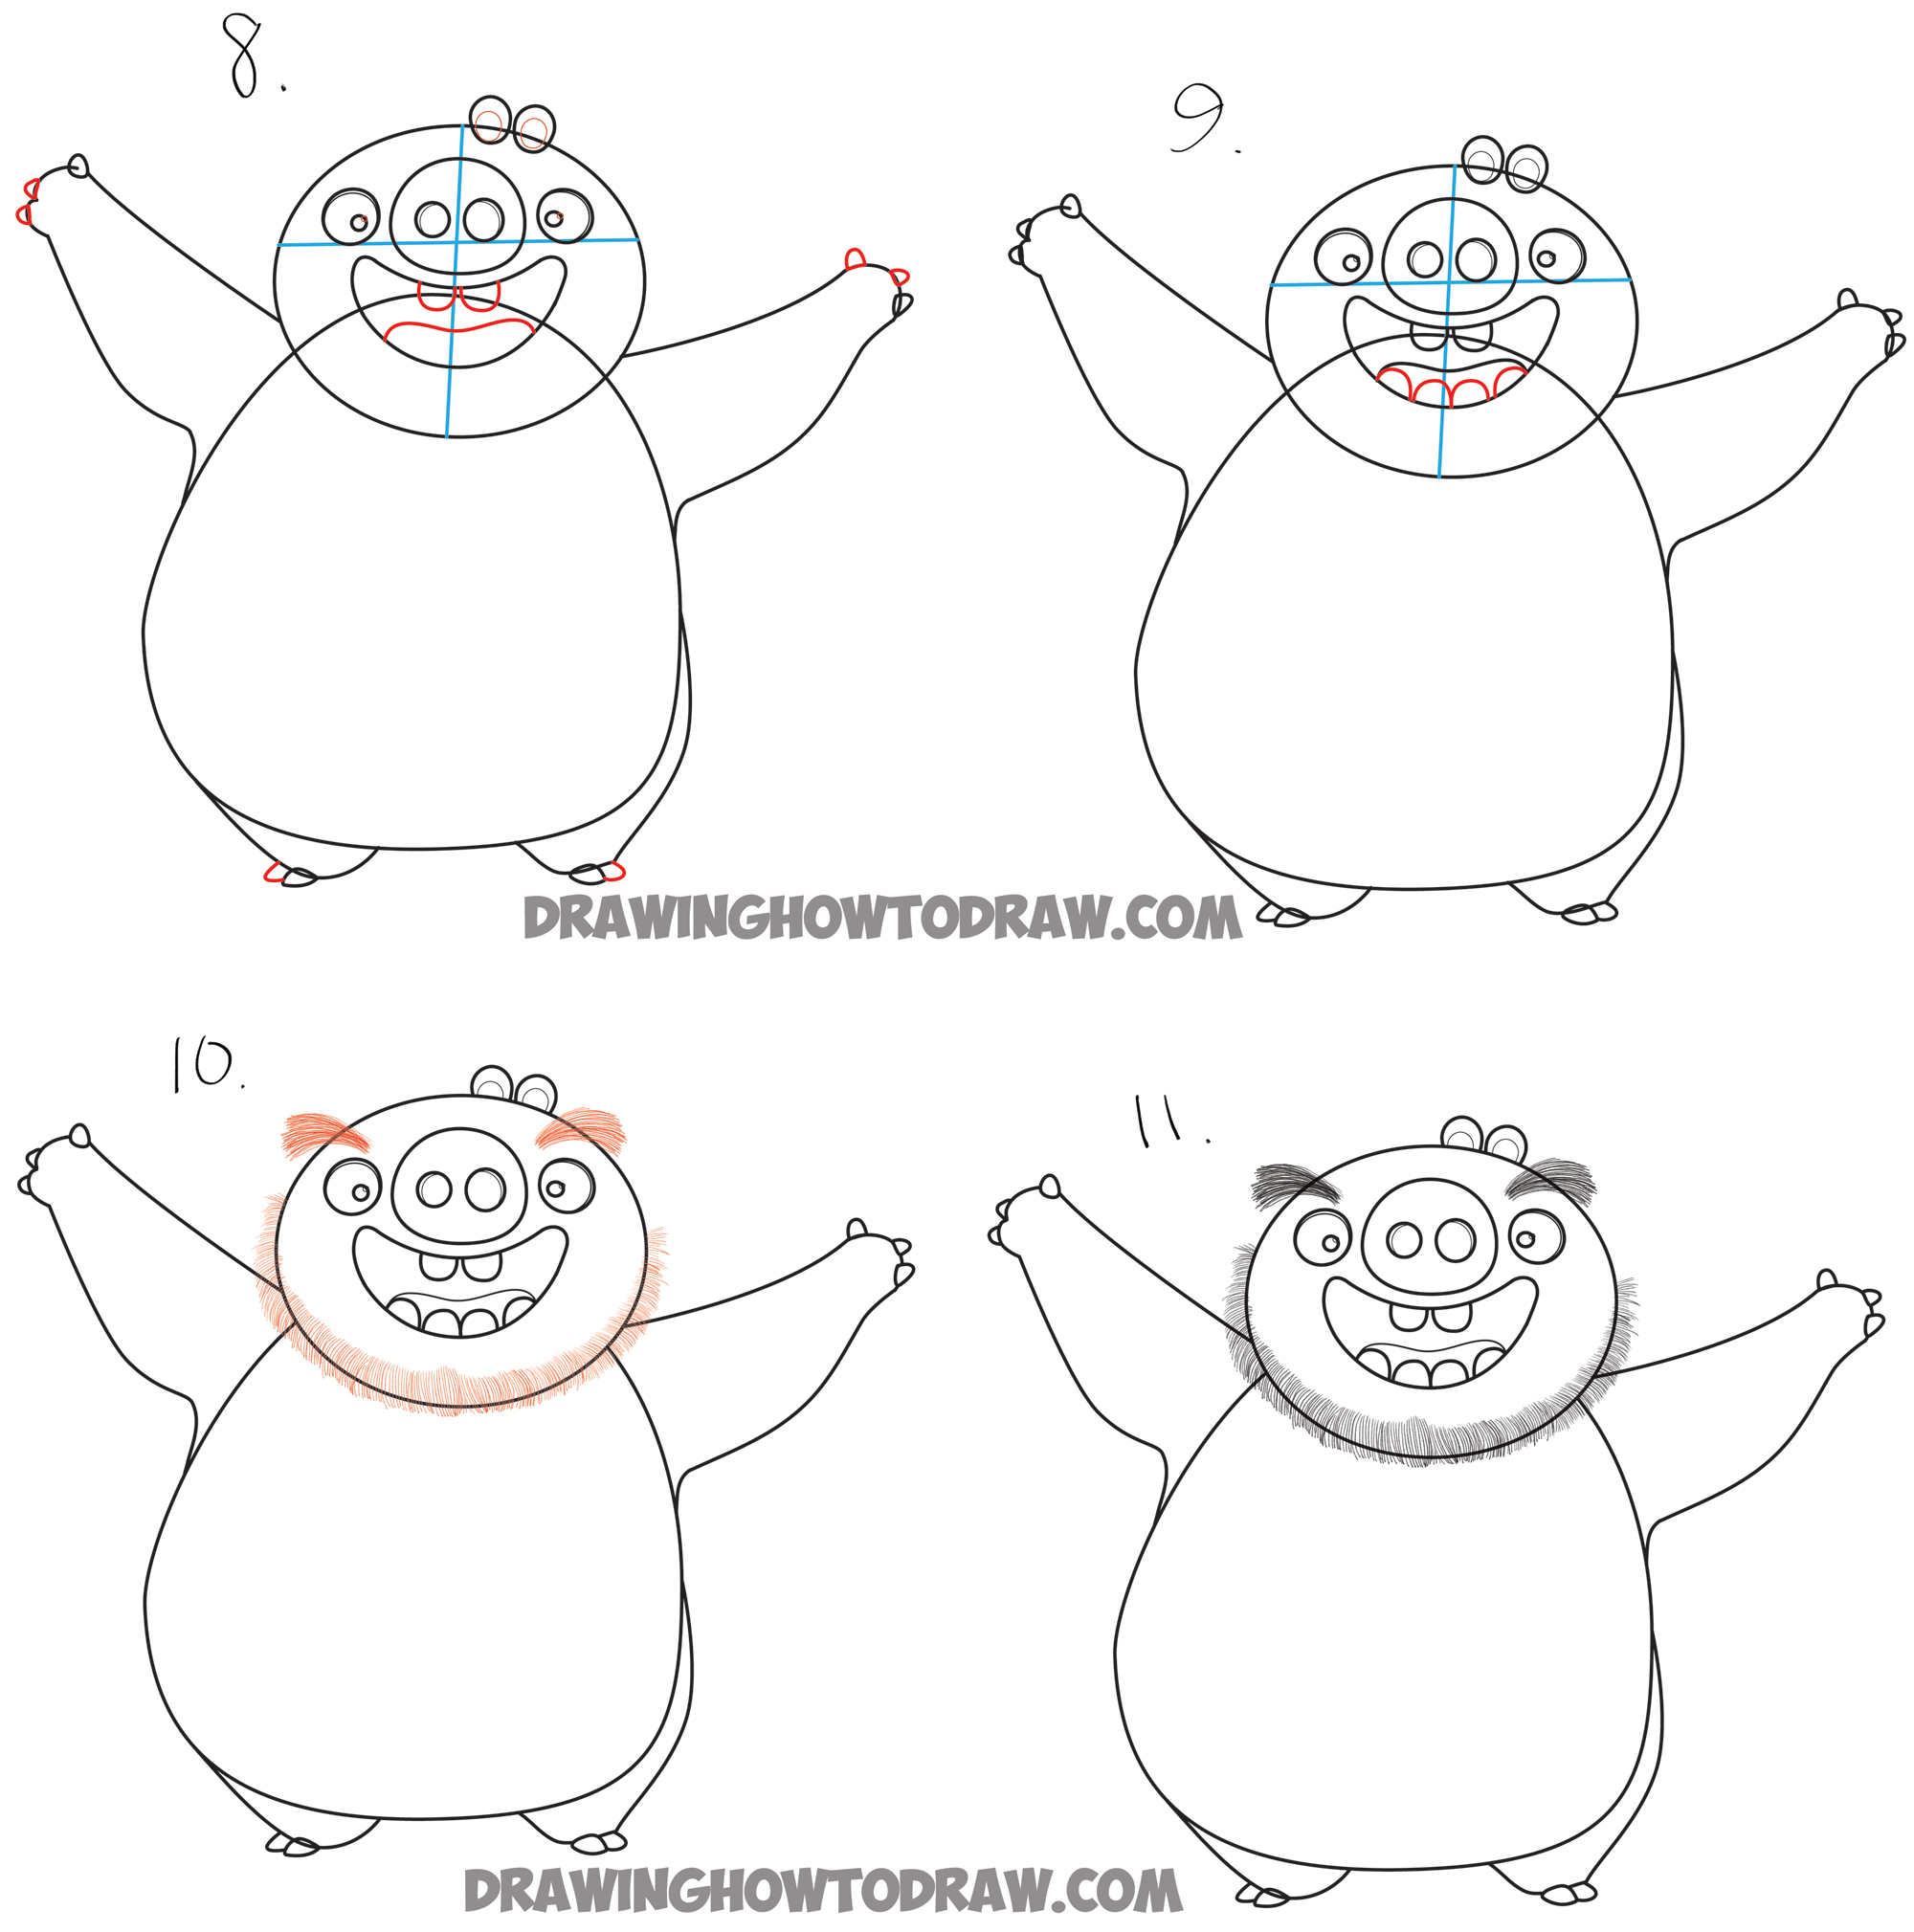 learn how to draw green pig called leonard simple steps tutorial